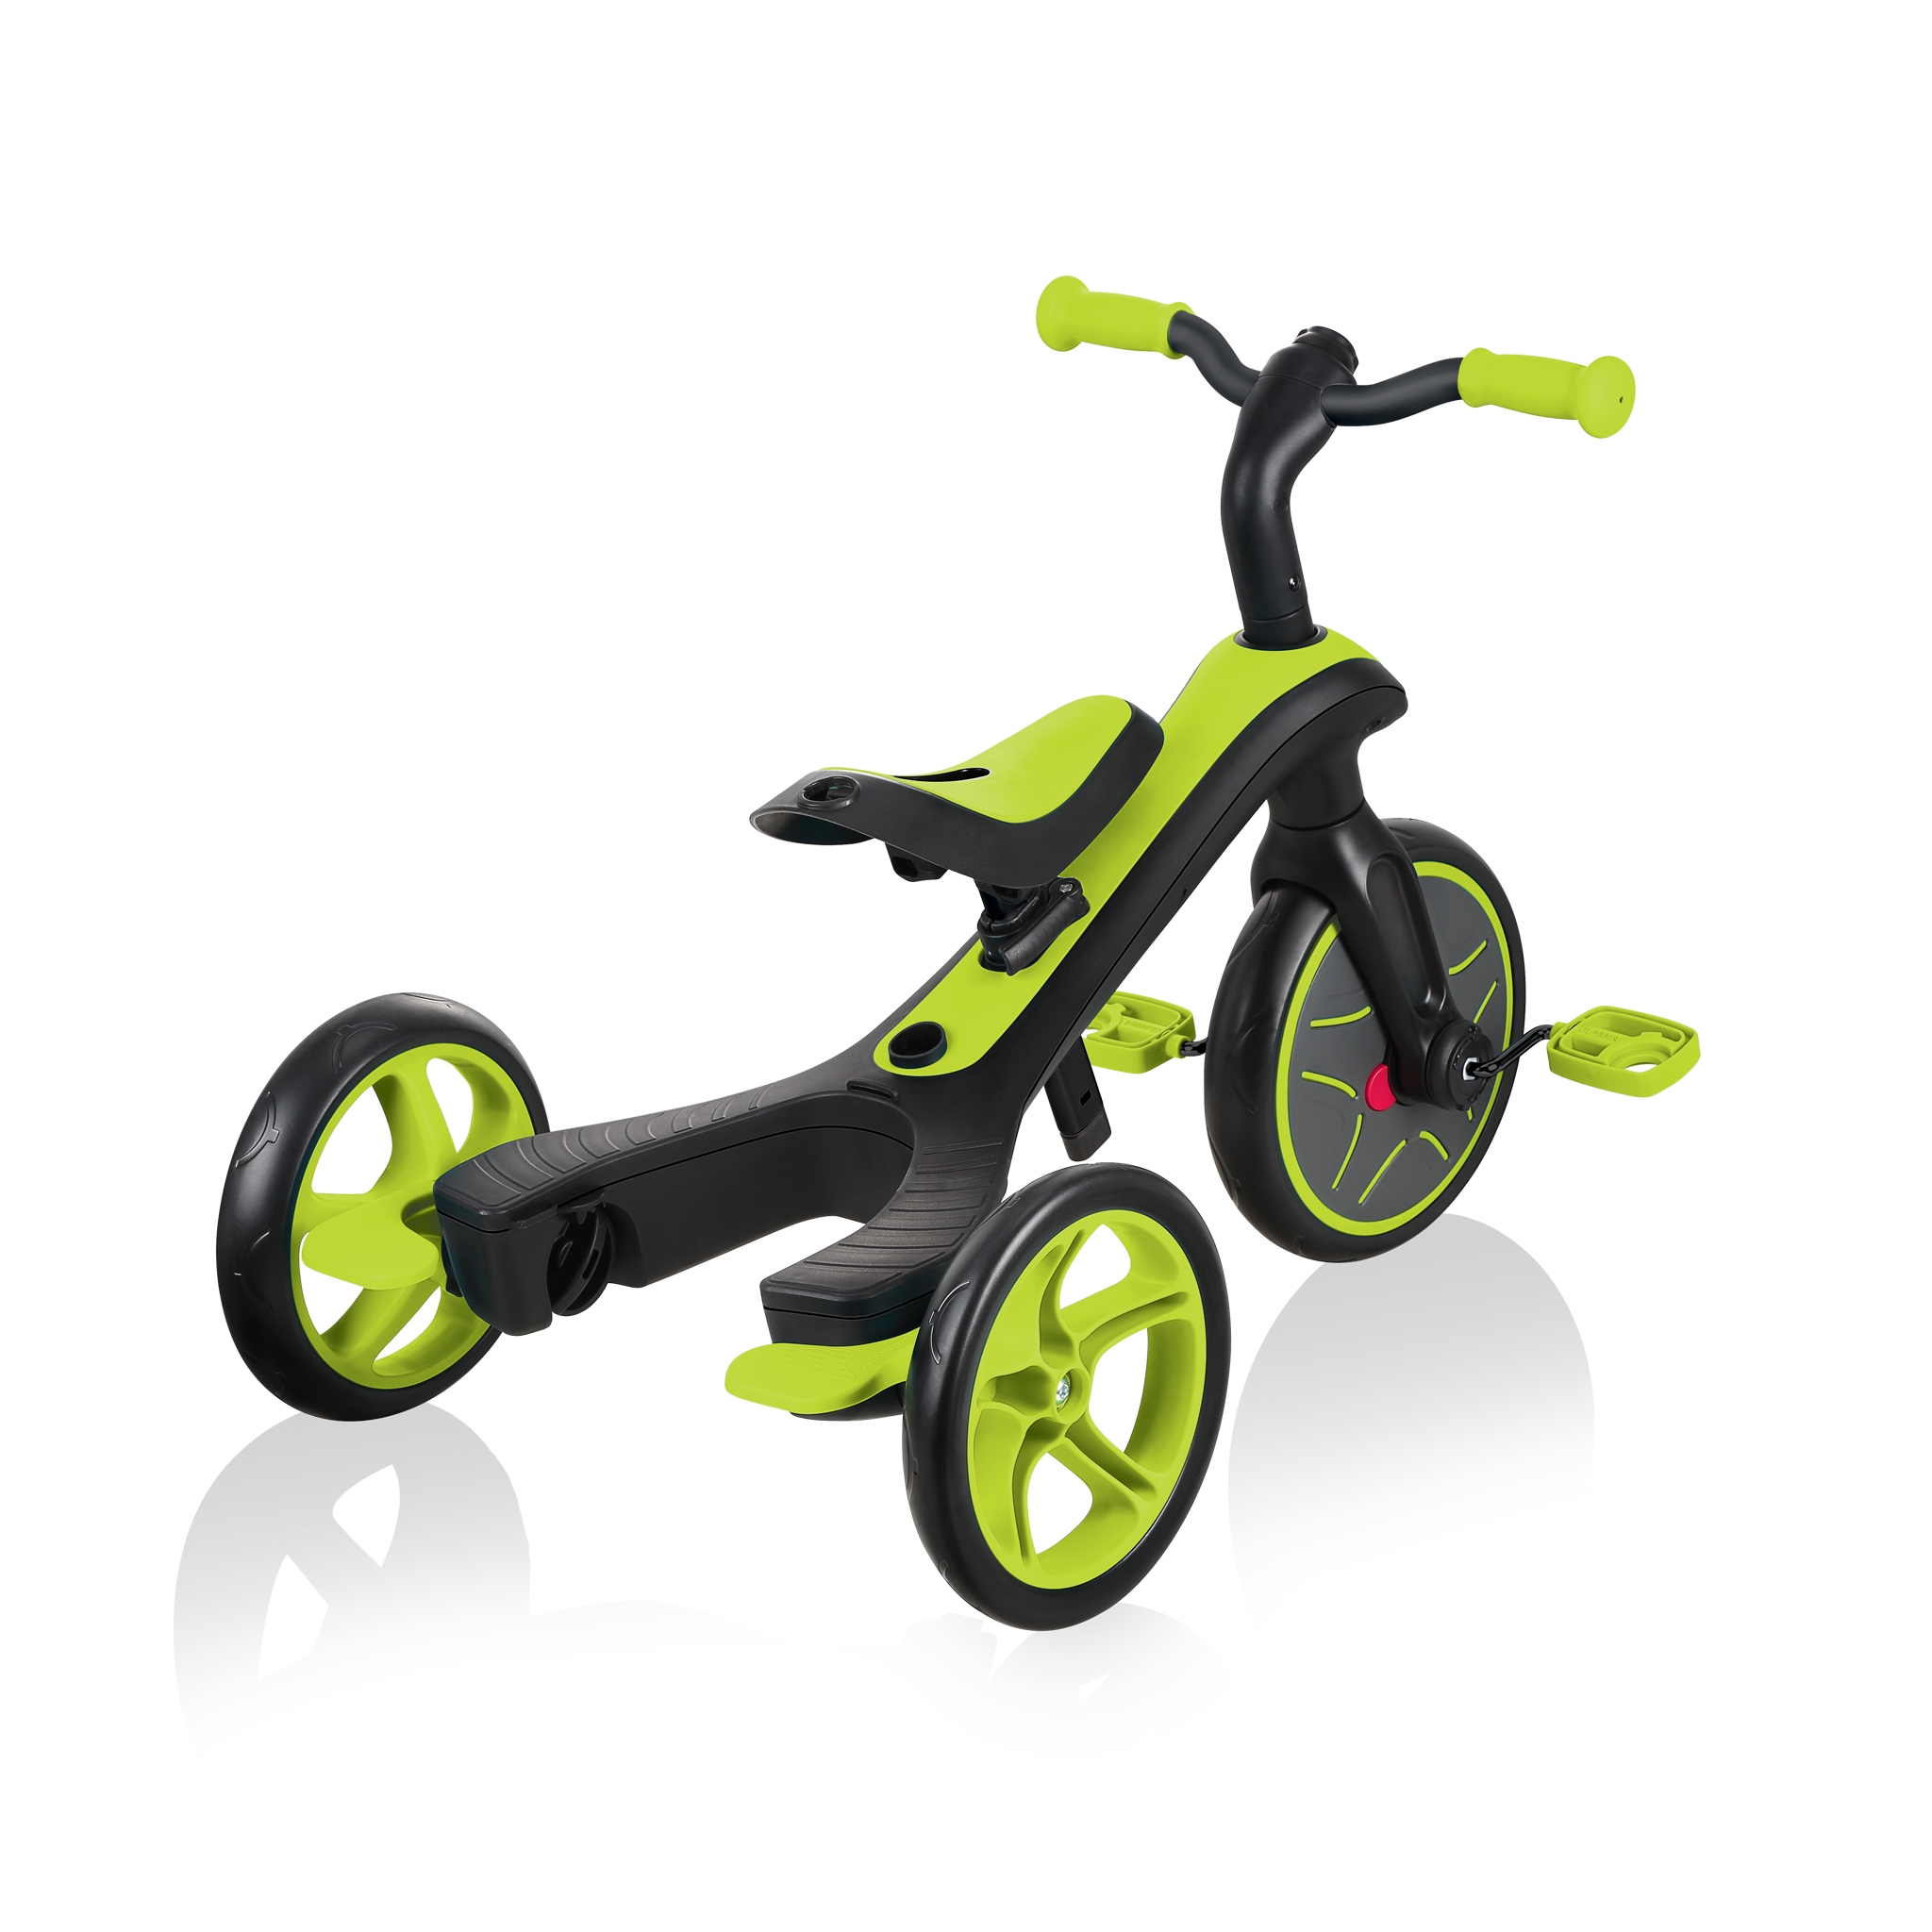 Globber-EXPLORER-TRIKE-3in1-all-in-one-baby-tricycle-and-kids-balance-bike-stage-2-training-trike 5